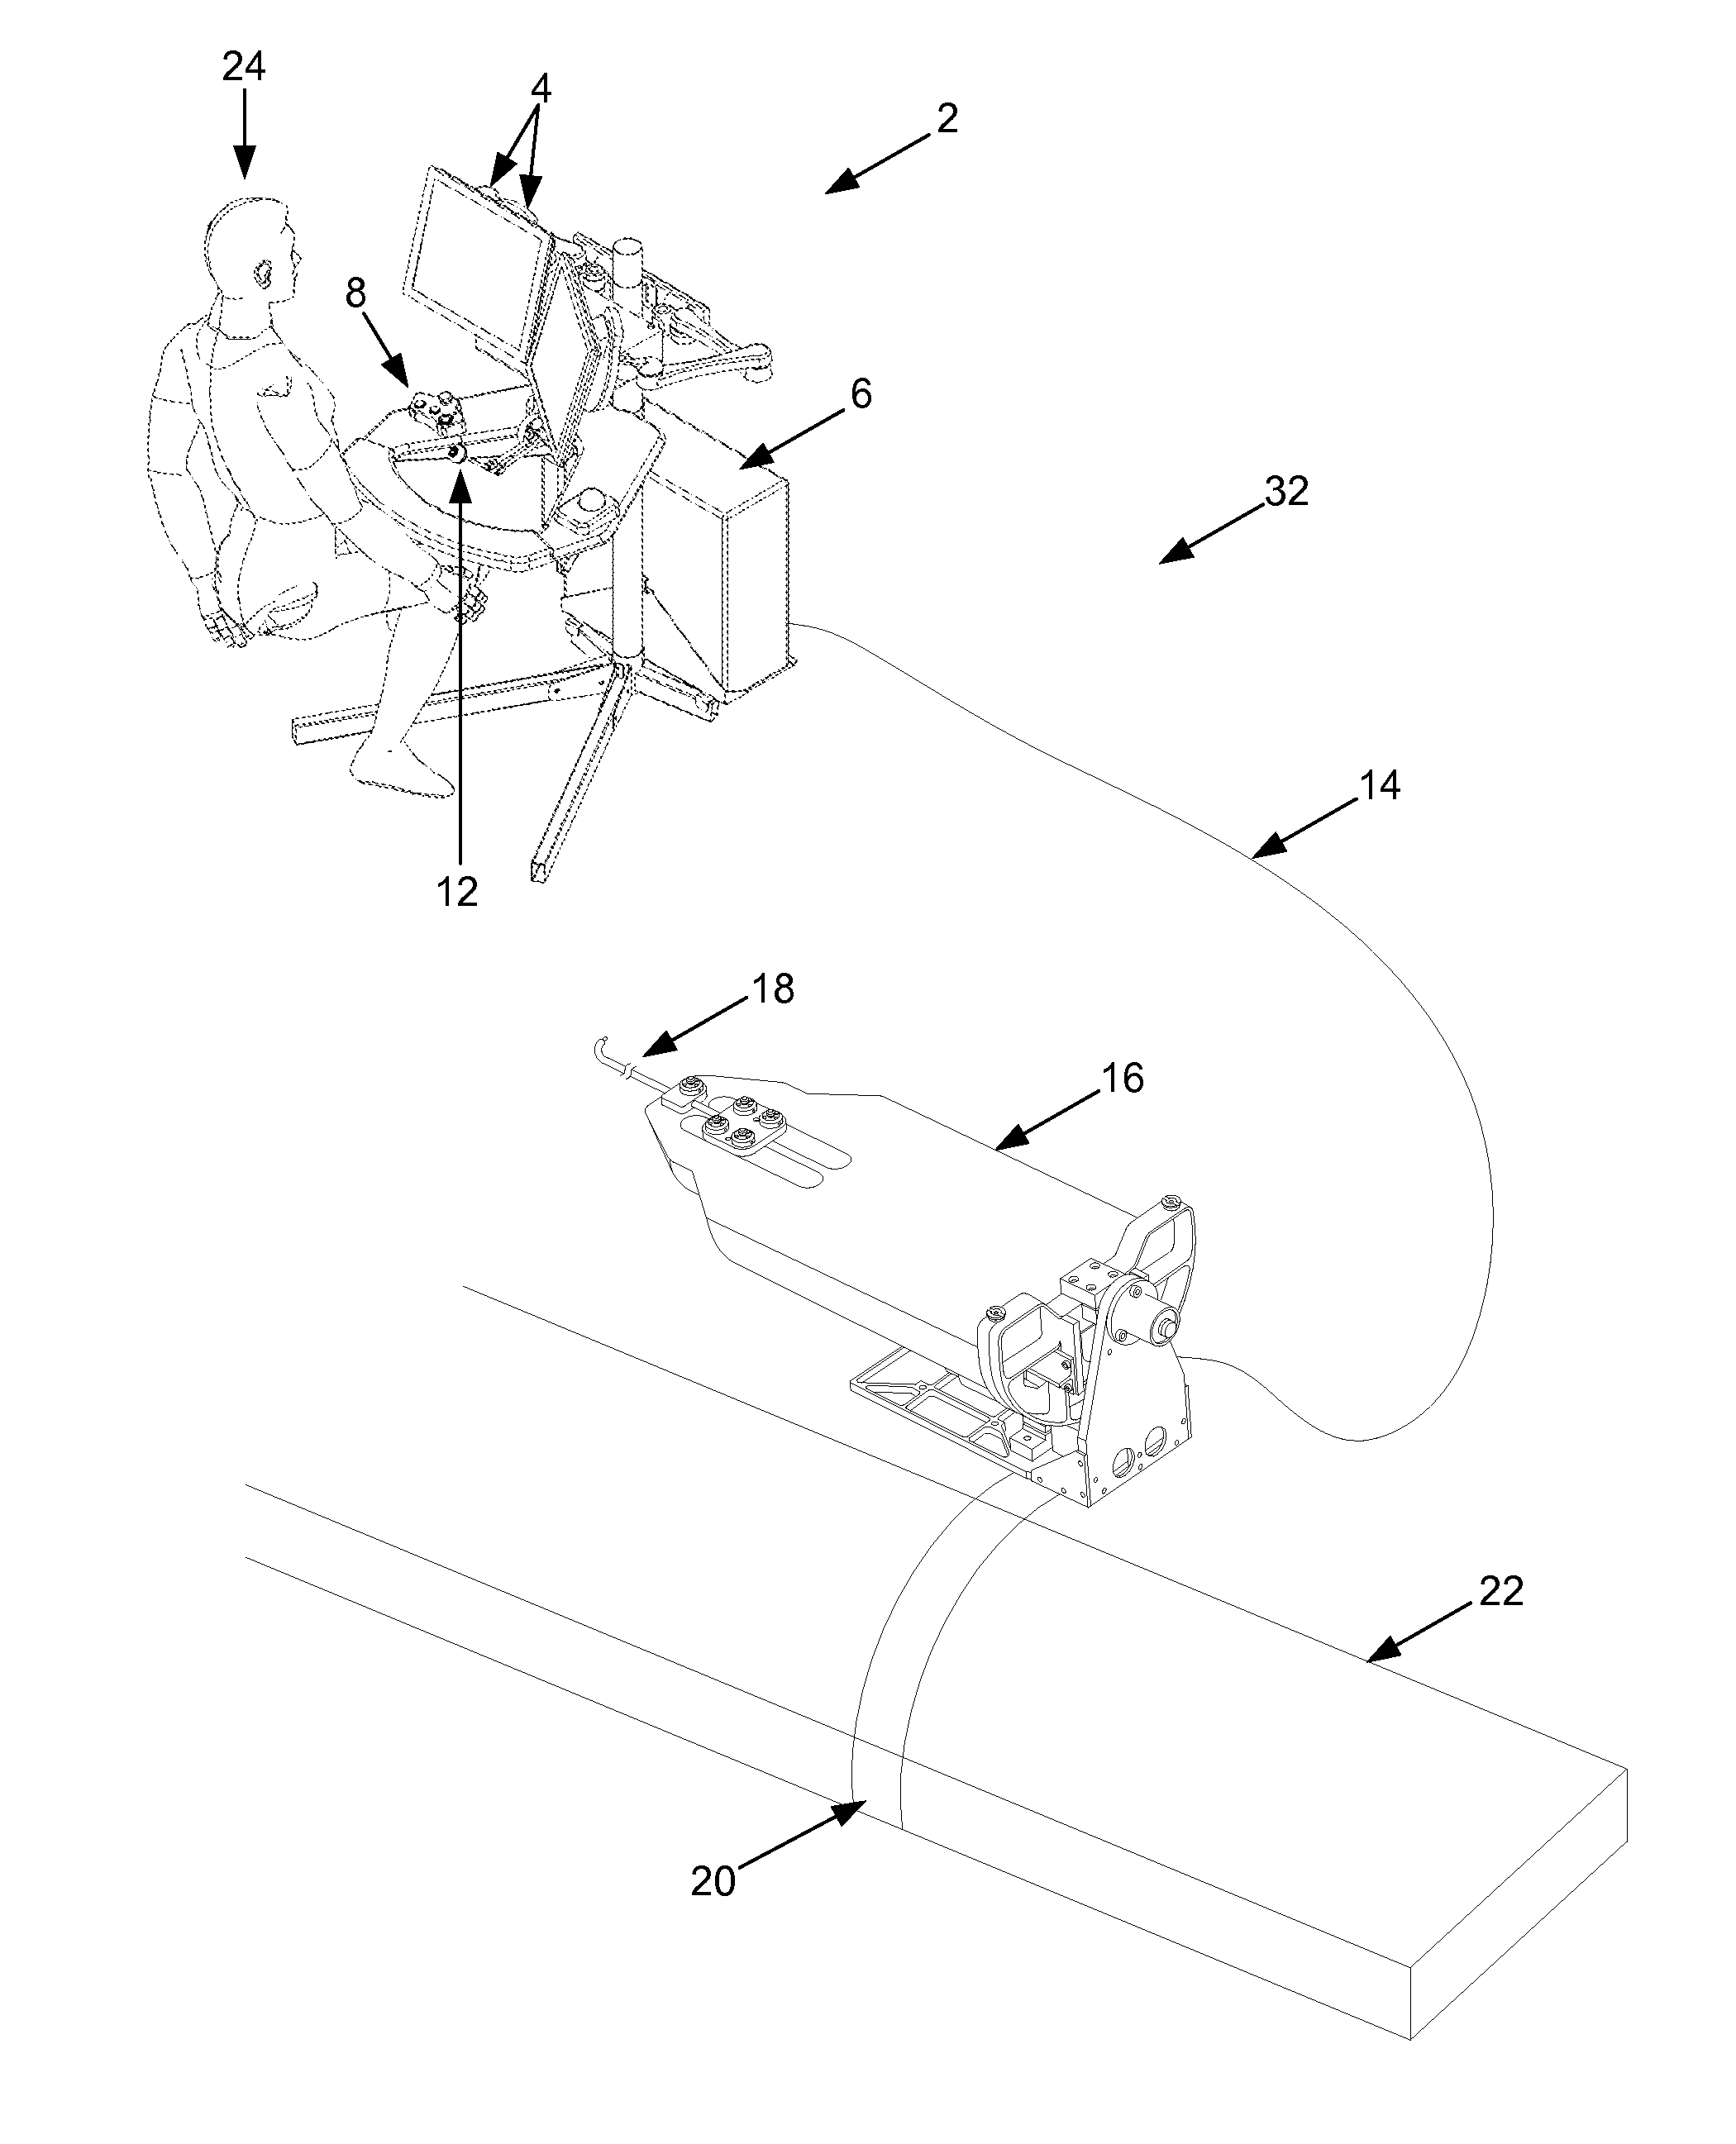 Systems and methods for three-dimensional ultrasound mapping